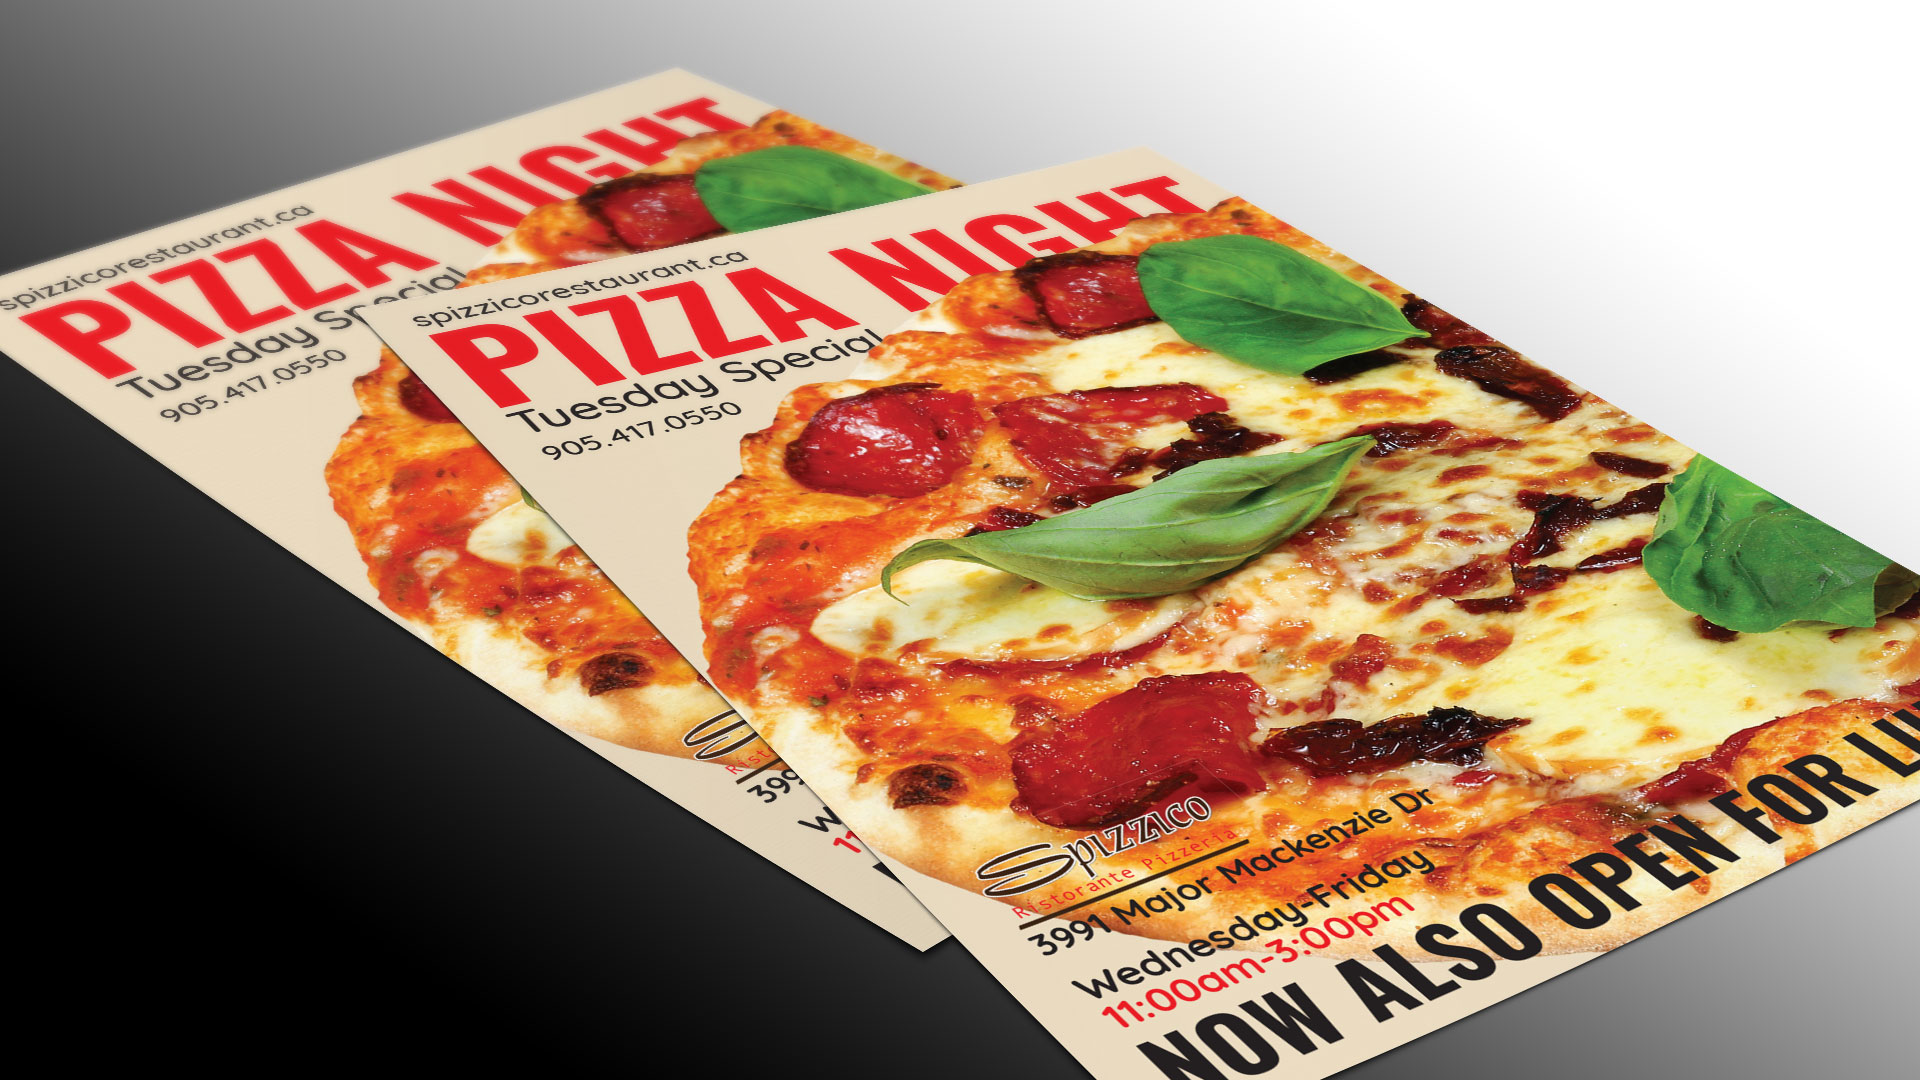 The presentation by PixelUp illustrates the unique flyer design tailored for Spizzico Restaurant. Displayed are two customized flyer designs featuring a tantalizing pizza image, neatly stacked atop one another. The pizza image dominates each flyer, leaving ample room at the top and bottom for titles and messages.